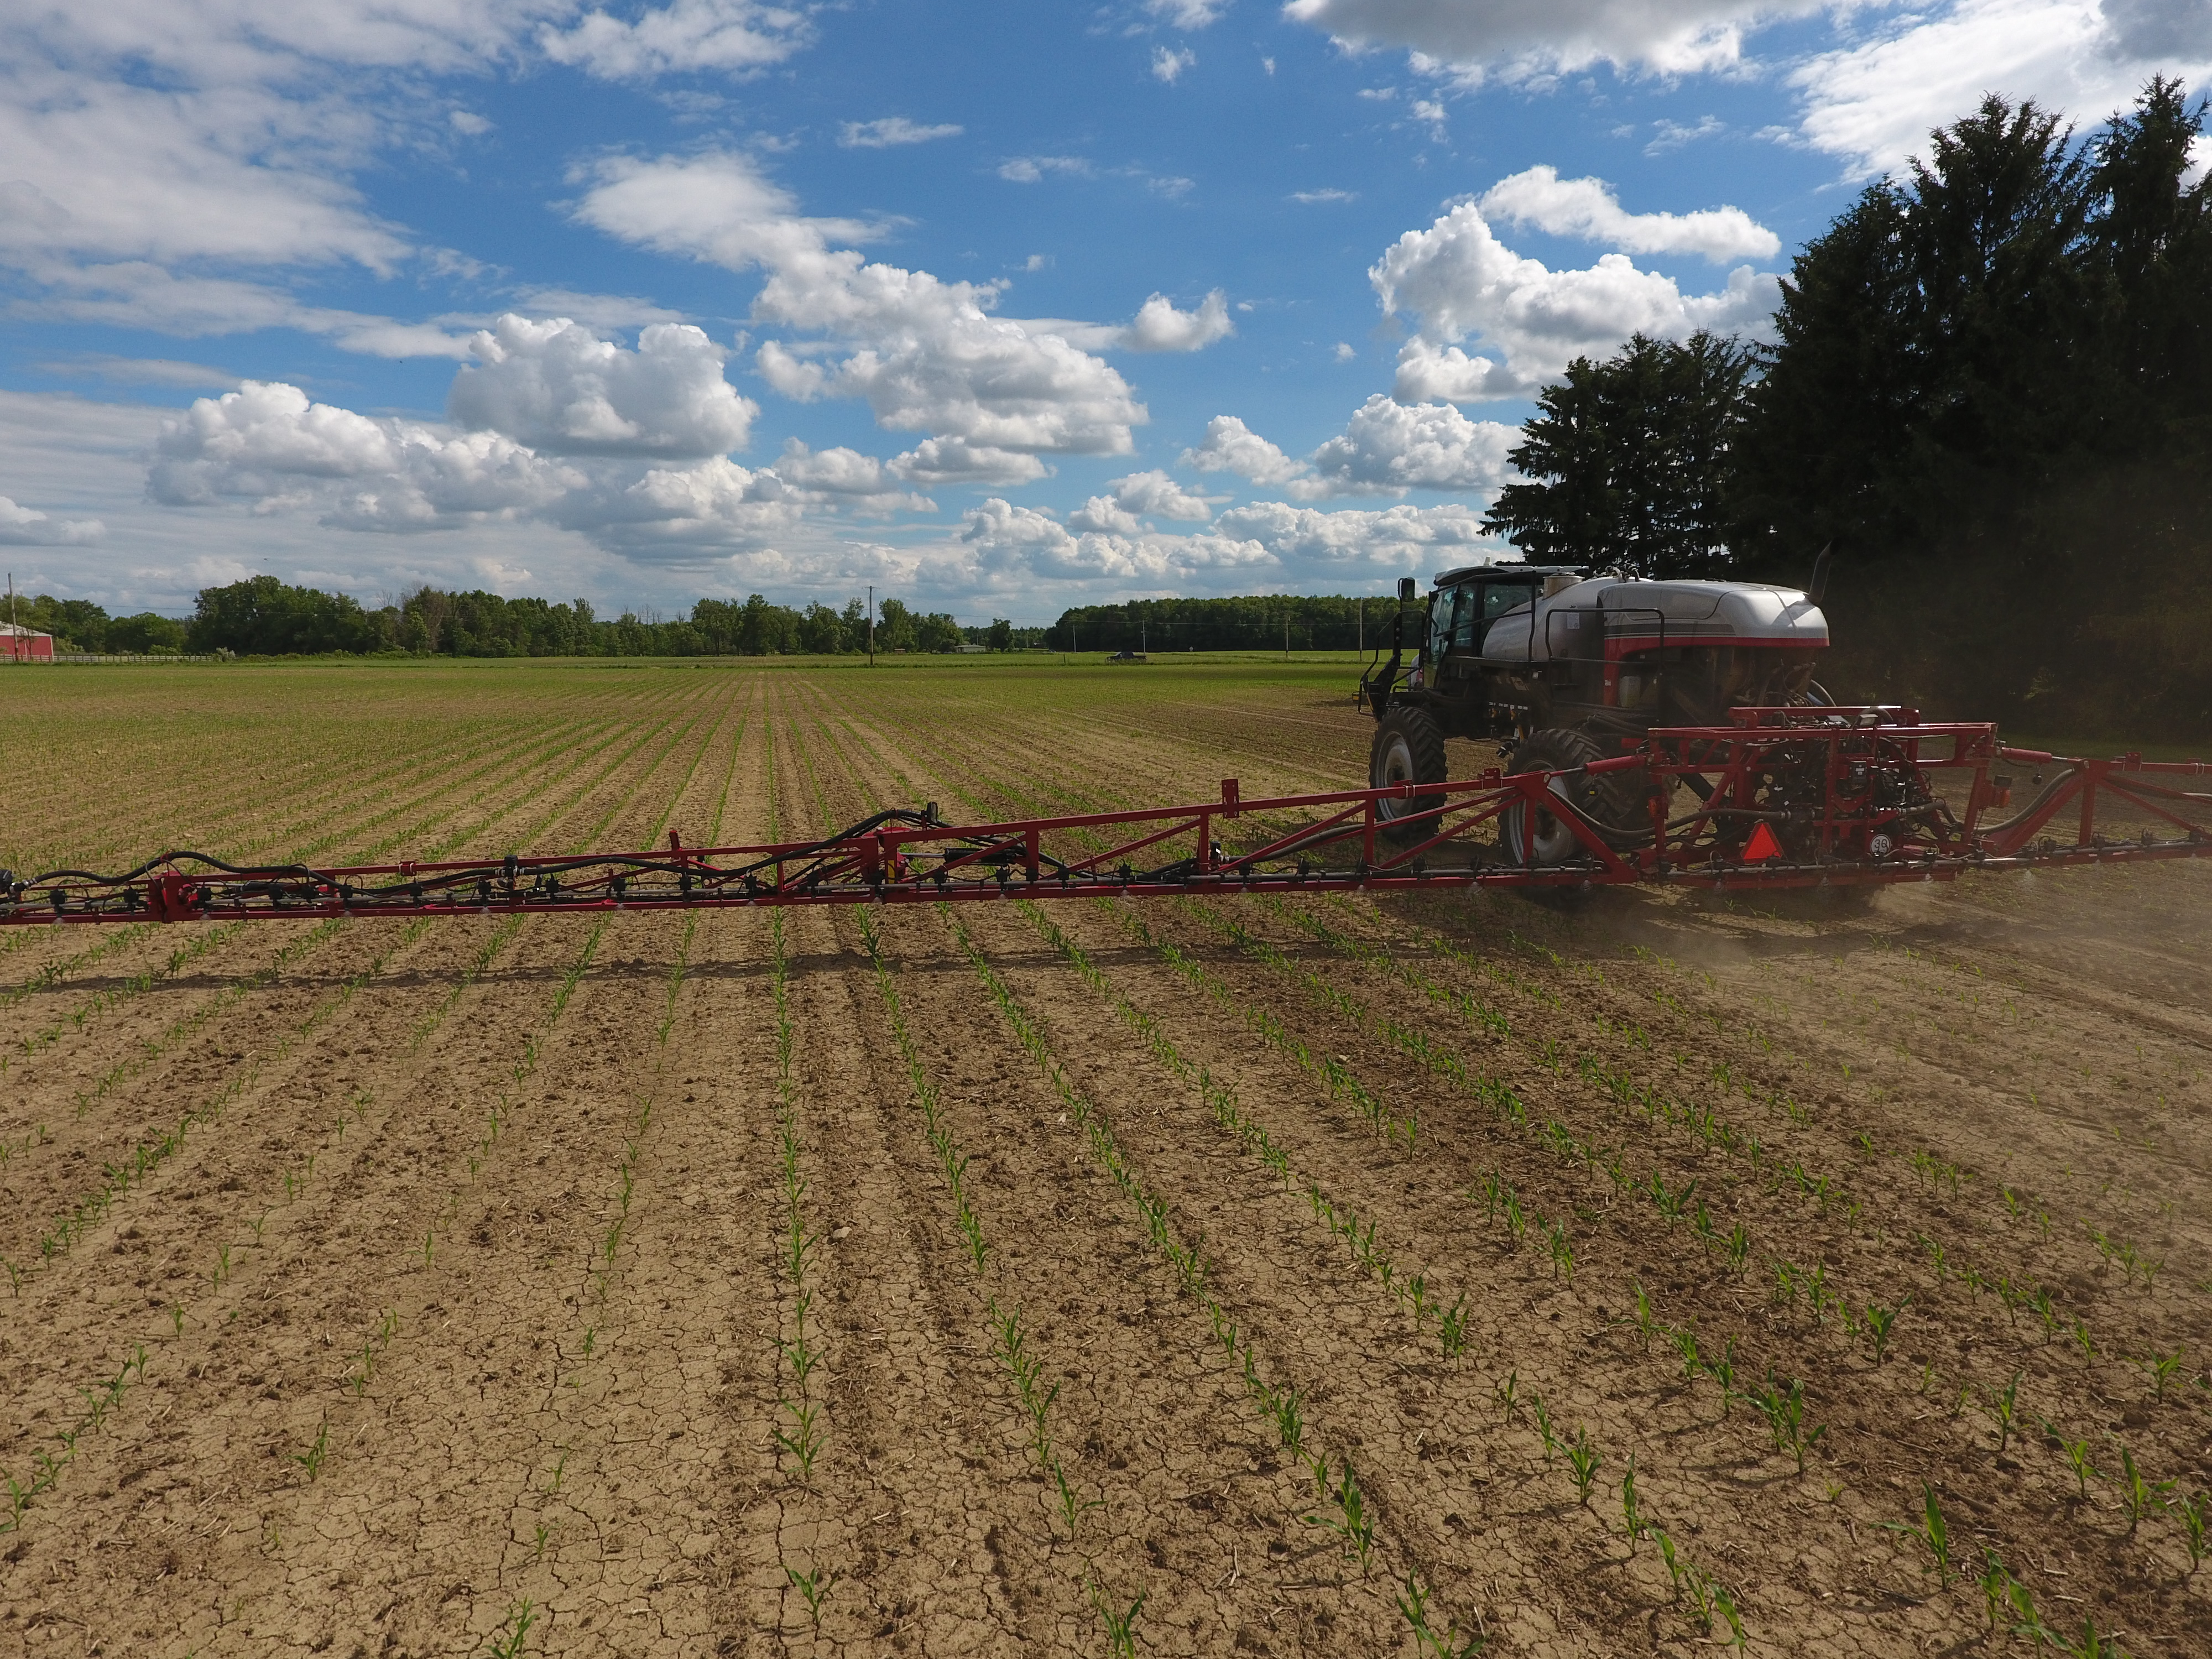 A sprayer makes a post-emergence application of corn herbicide.